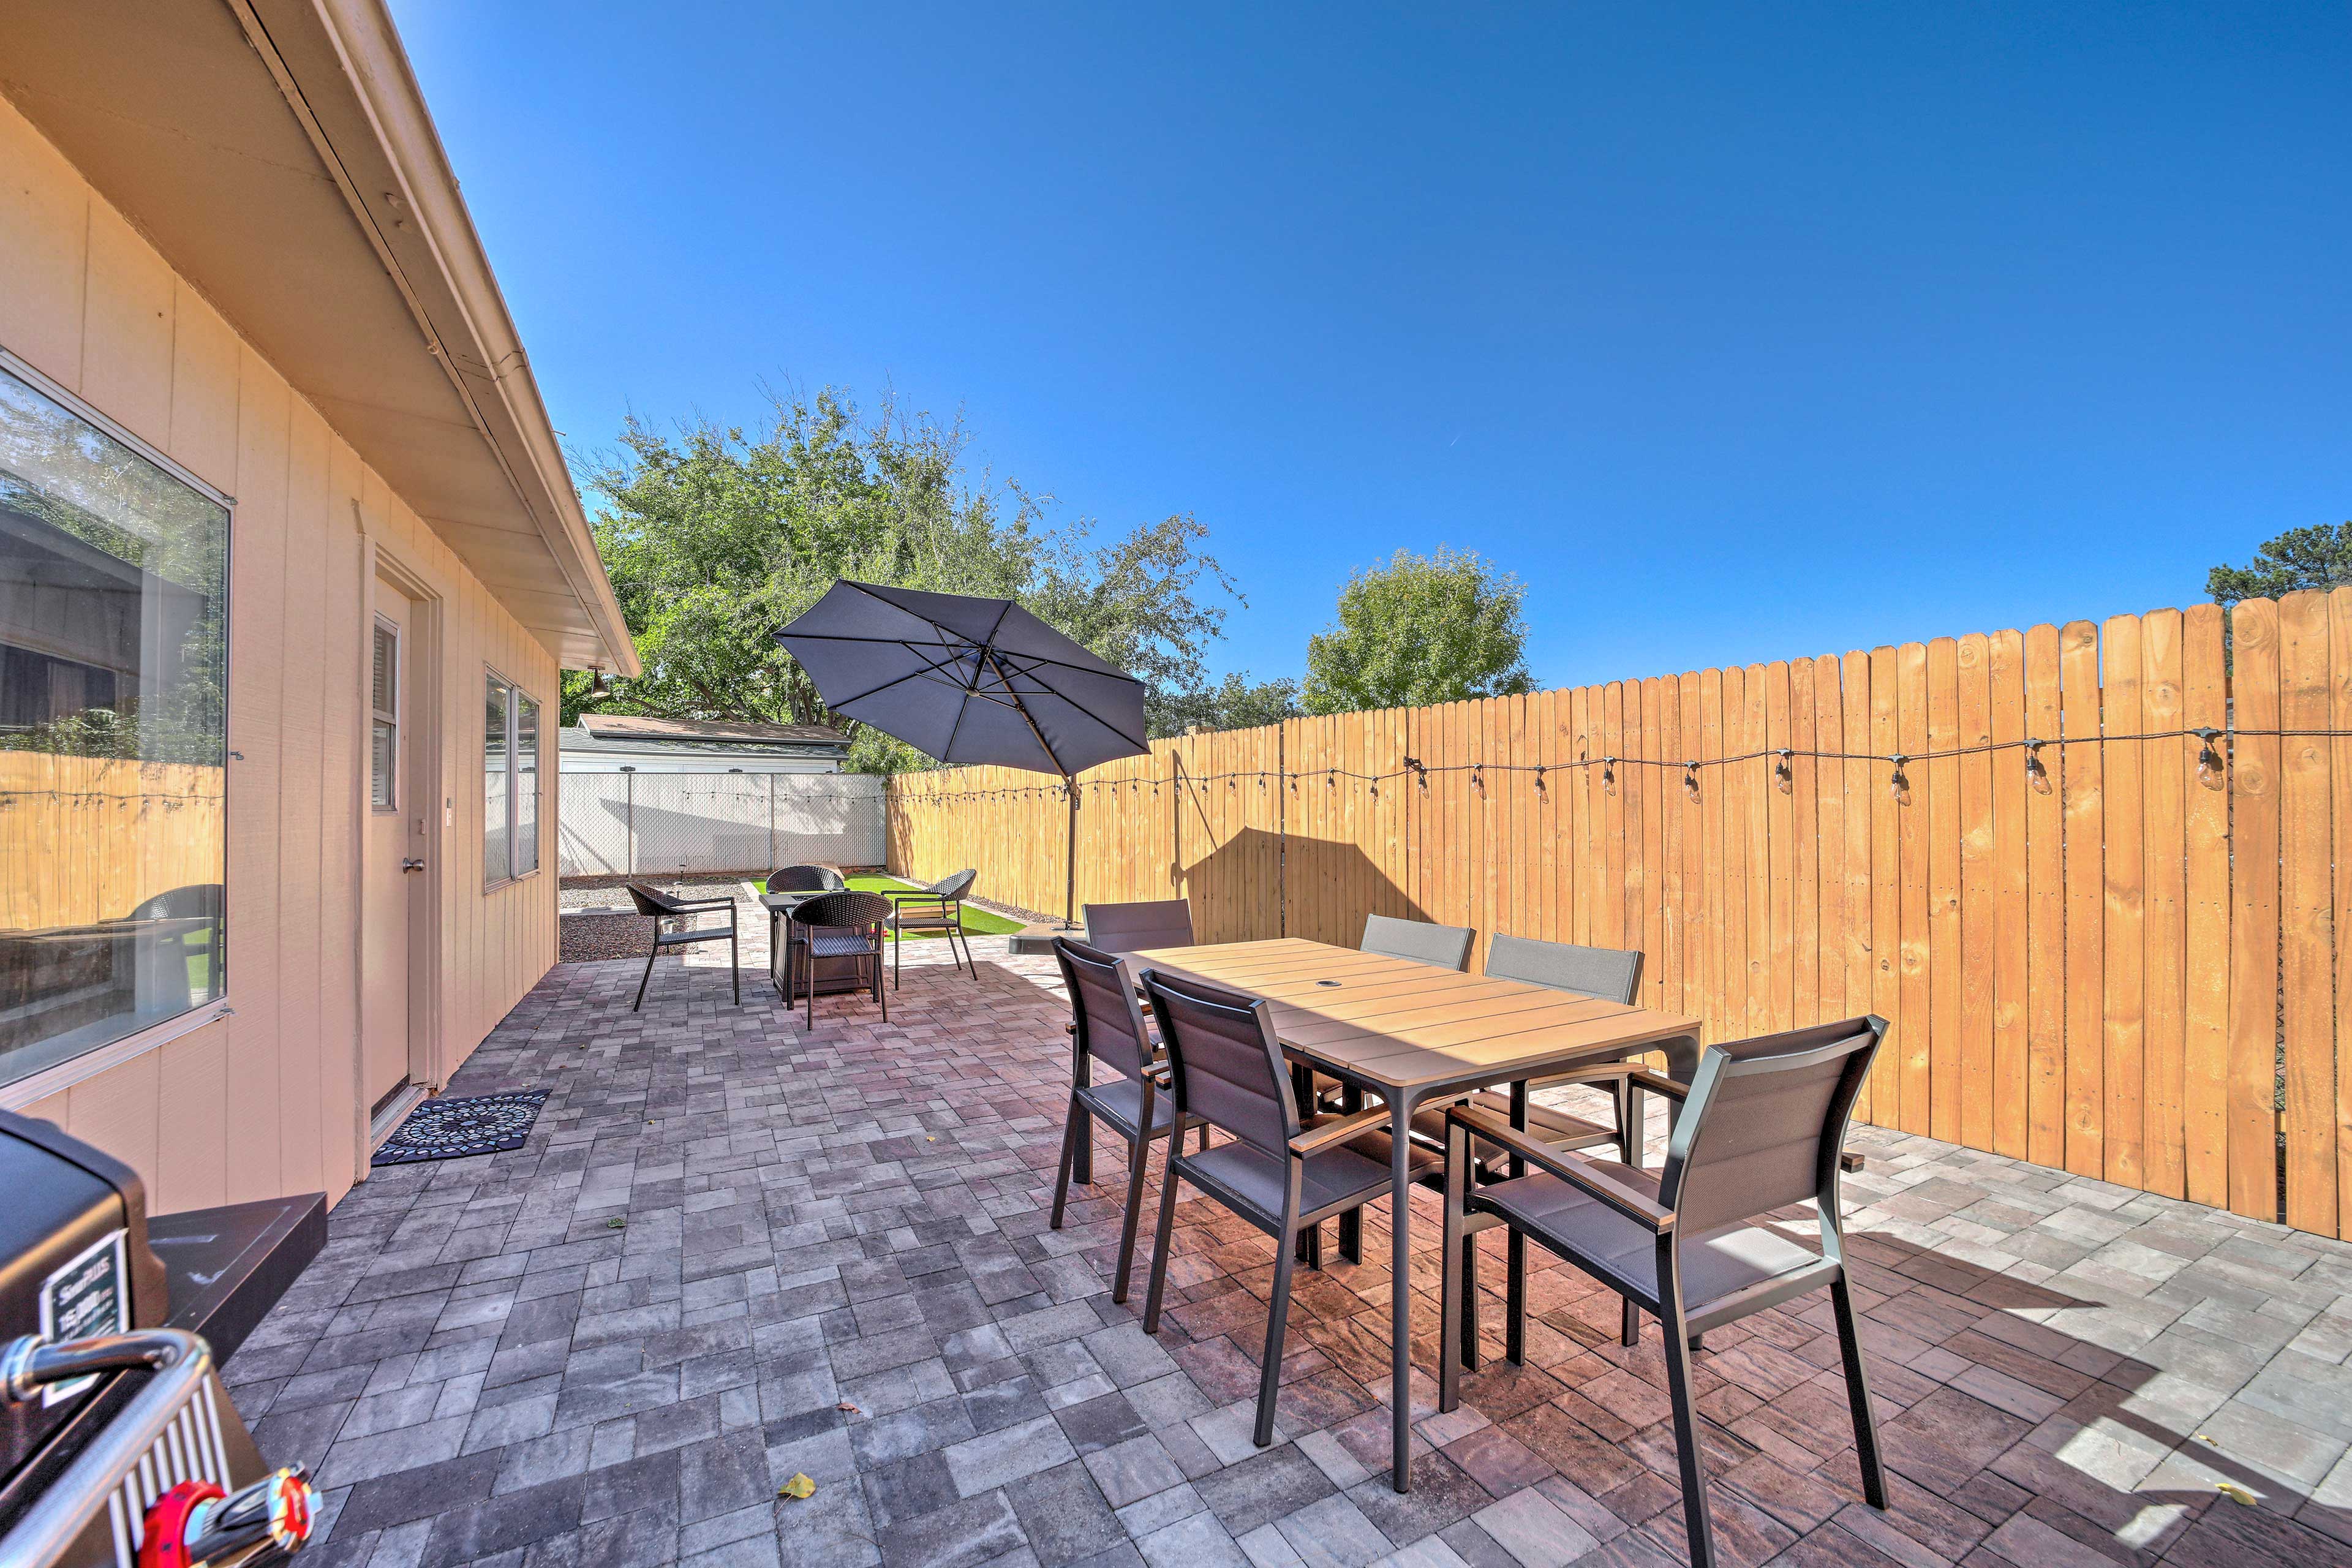 Property Image 2 - Trendy Digs w/ Yard Games, Fire Pit & Grill!